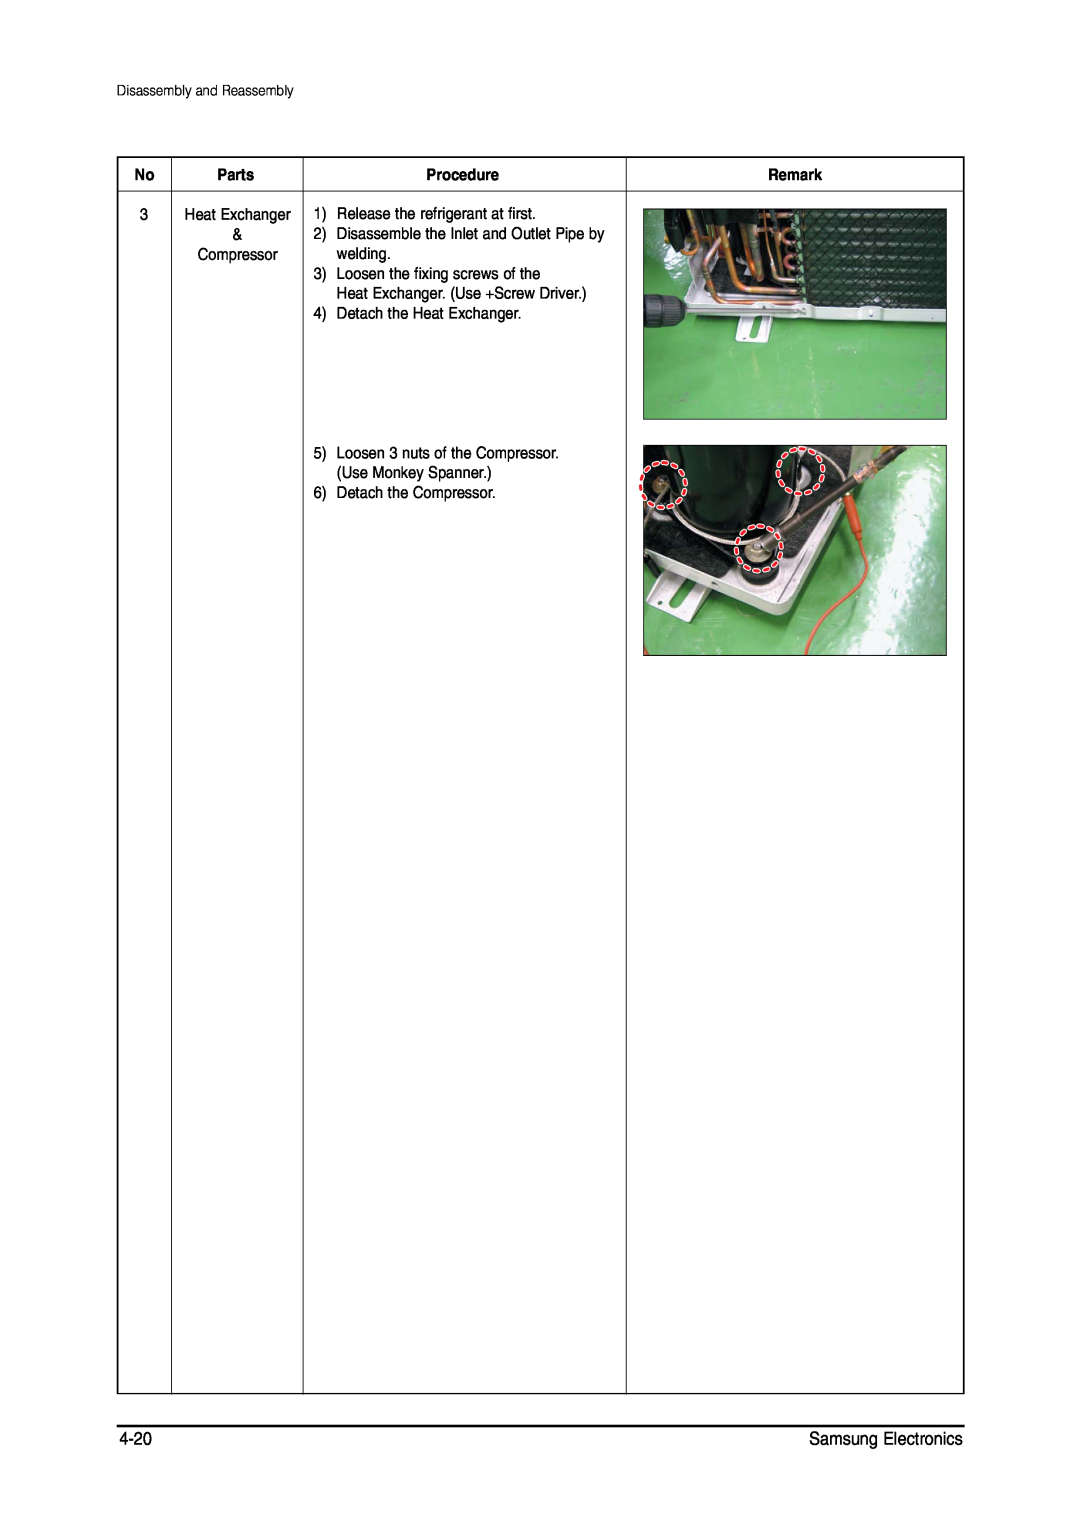 Samsung MH026FNCA service manual Procedure, Remark, Release the refrigerant at first 